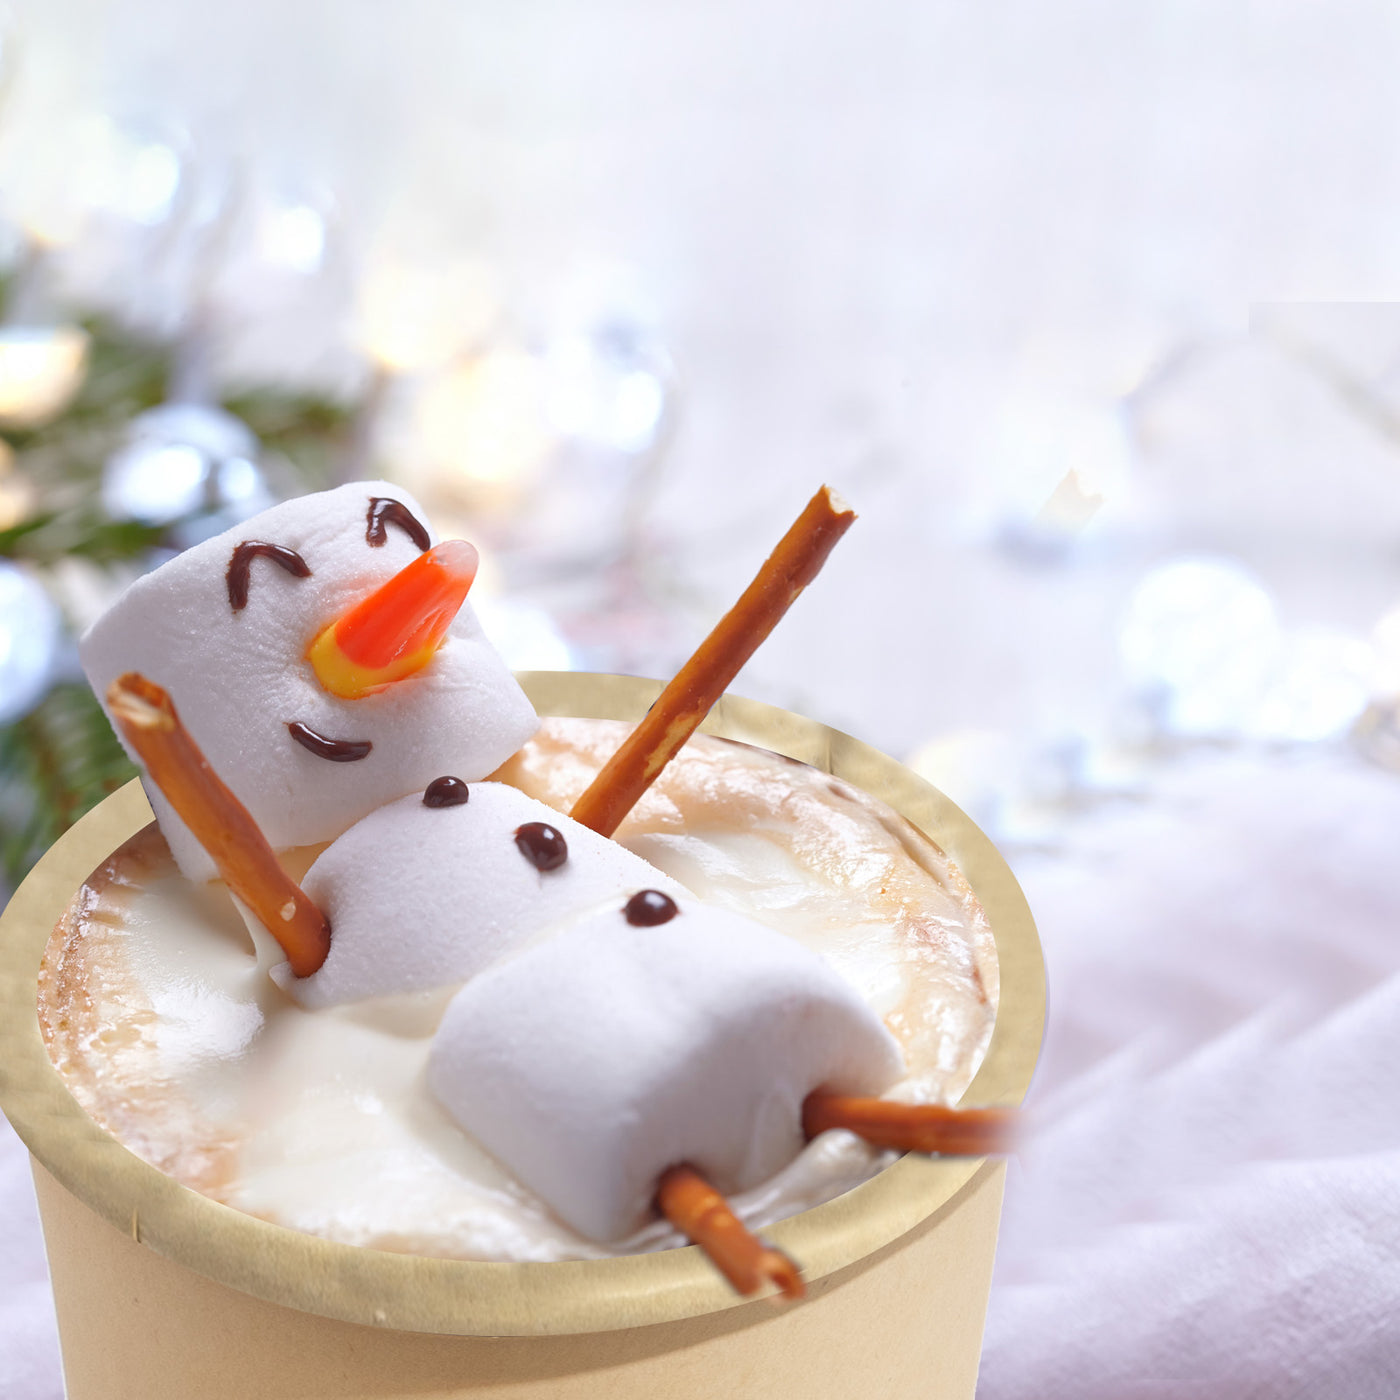 A 12oz cup of hot chocolate cup and a snowman placed inside it